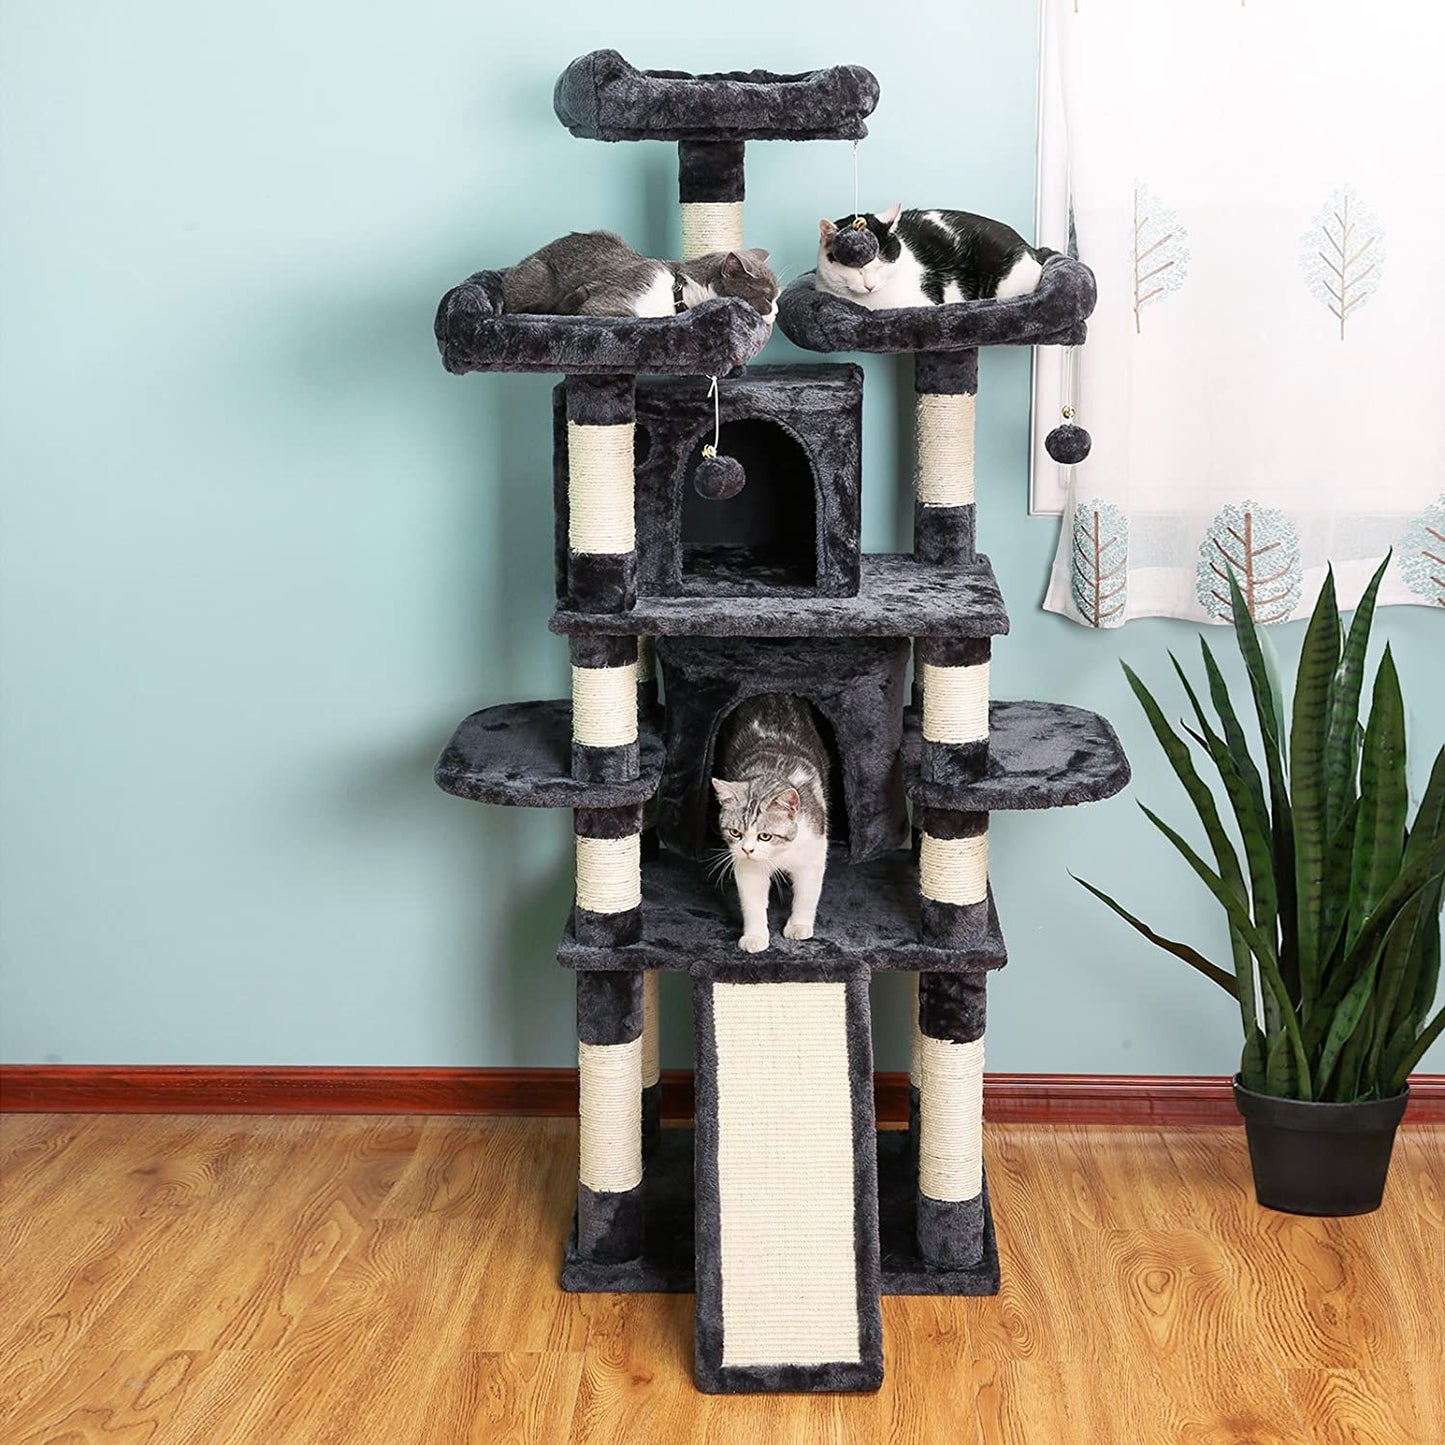 Nancy's Clacton Luxury Scratching Post for Cats - Cat Scratching Post - 5 Lying Places - Gray and White - 60 x 55 x 172 cm